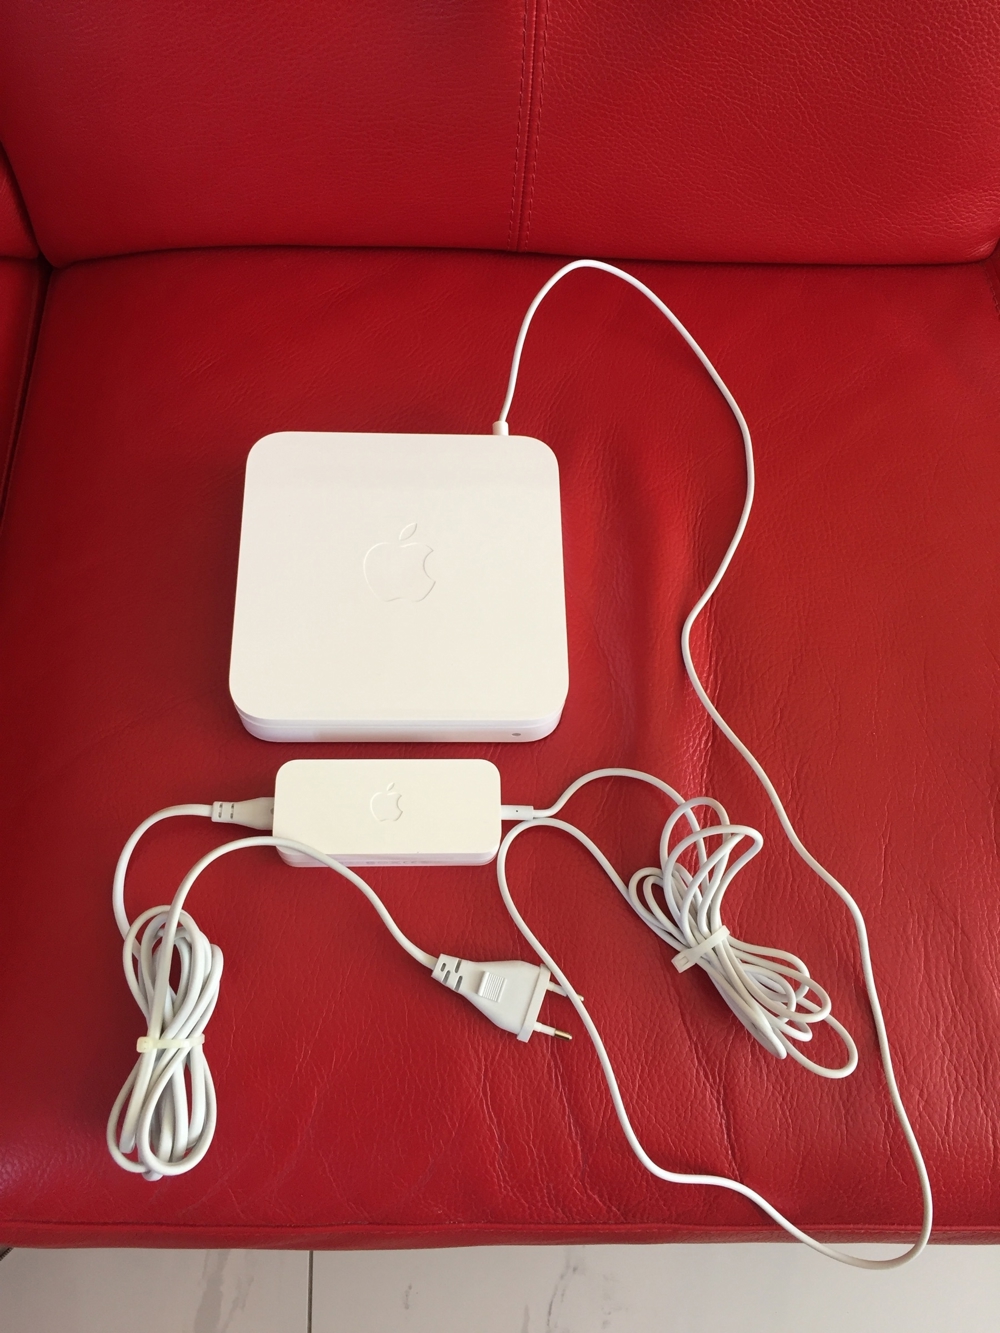 Apple-Airport-Extreme-A 1354 W Lan Router